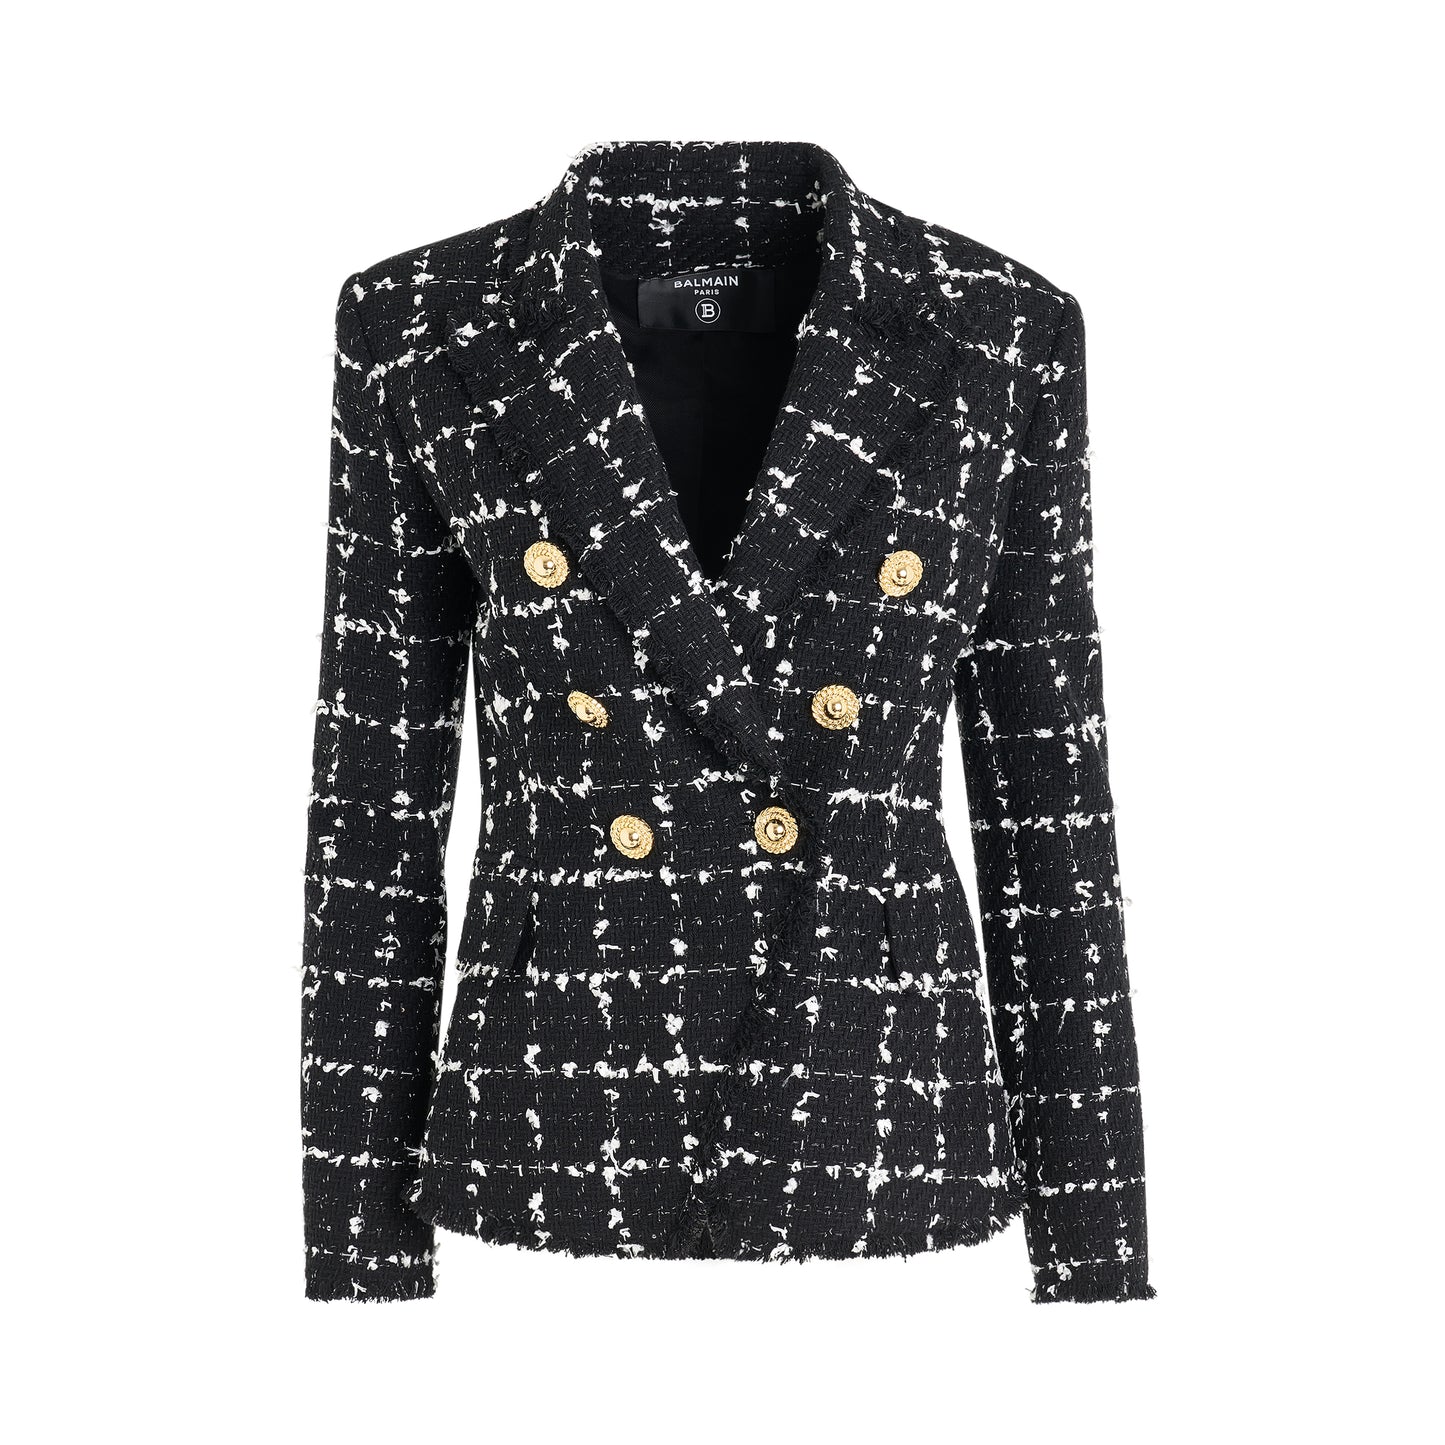 6 Button Double Breasted Tweed Jacket in Black/White/Silver